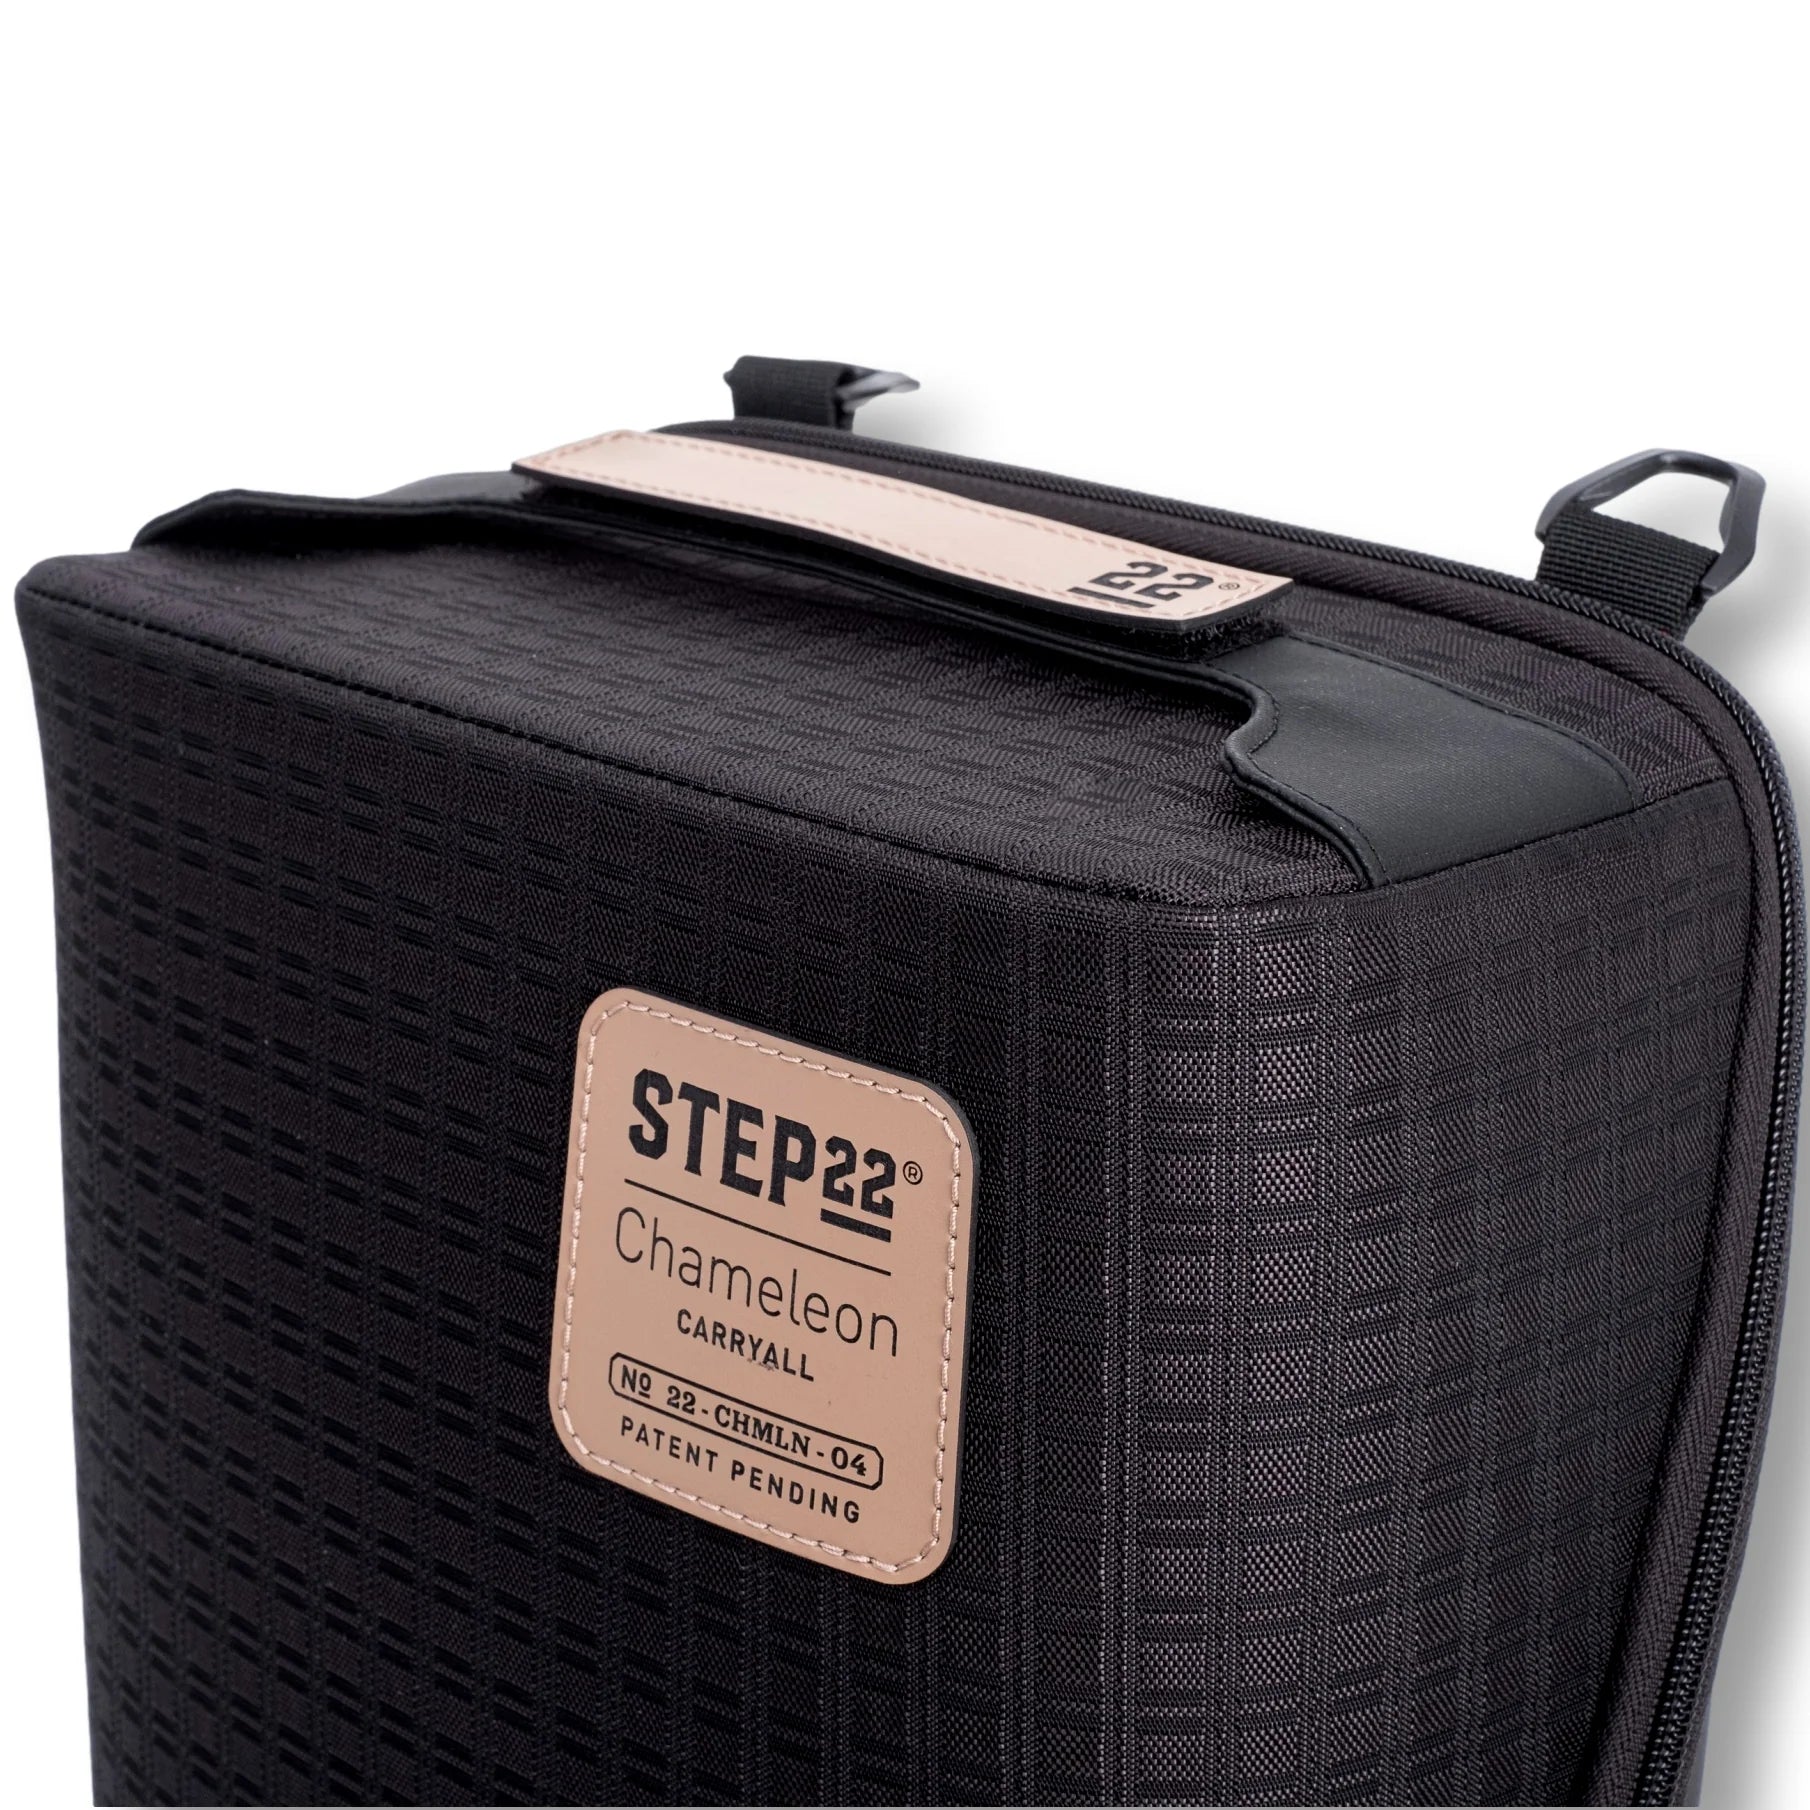 STEP 22 Chameleon™ Carryall with REEF Panel